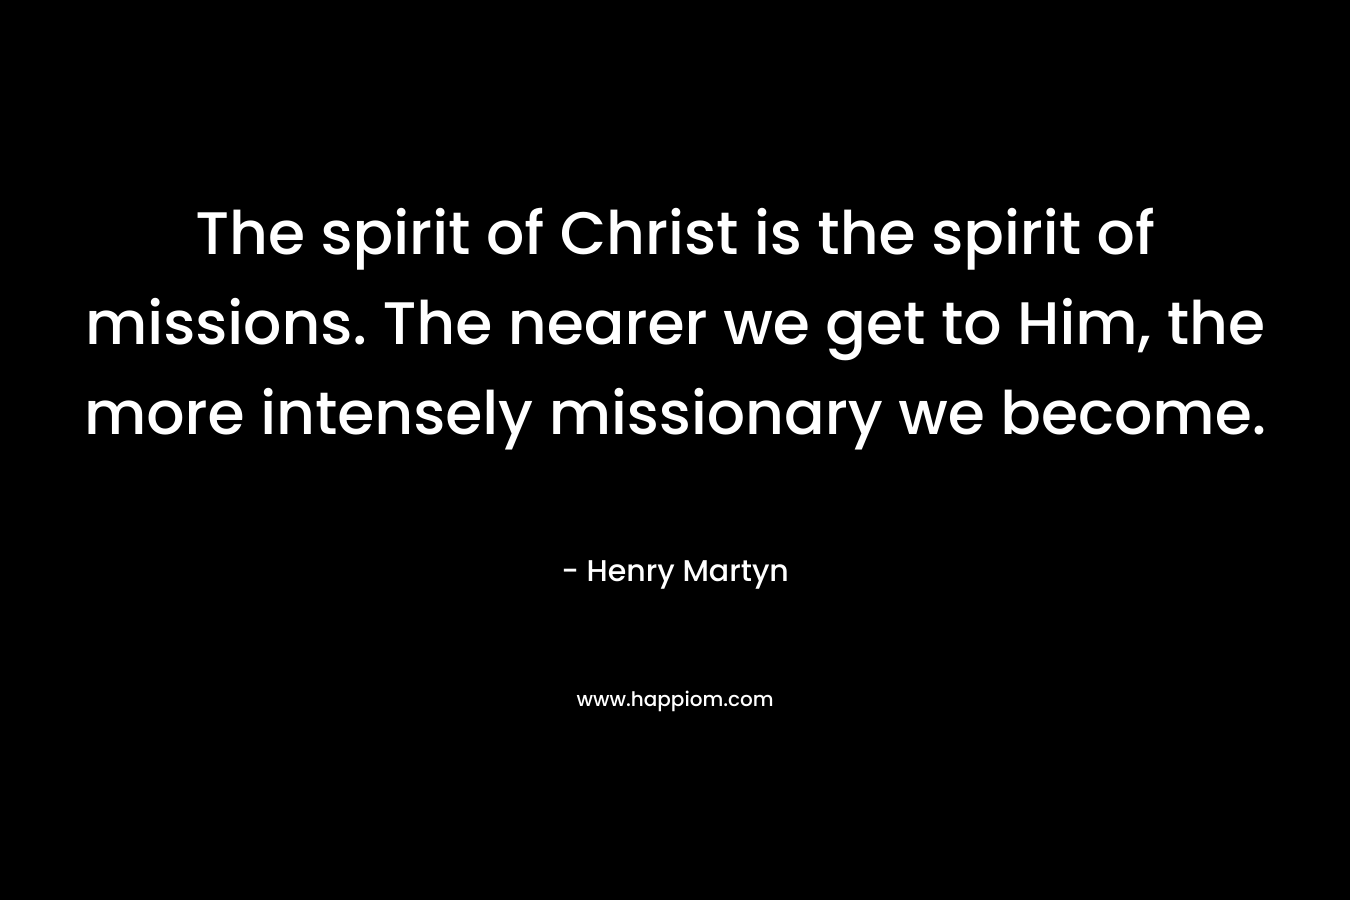 The spirit of Christ is the spirit of missions. The nearer we get to Him, the more intensely missionary we become. – Henry Martyn